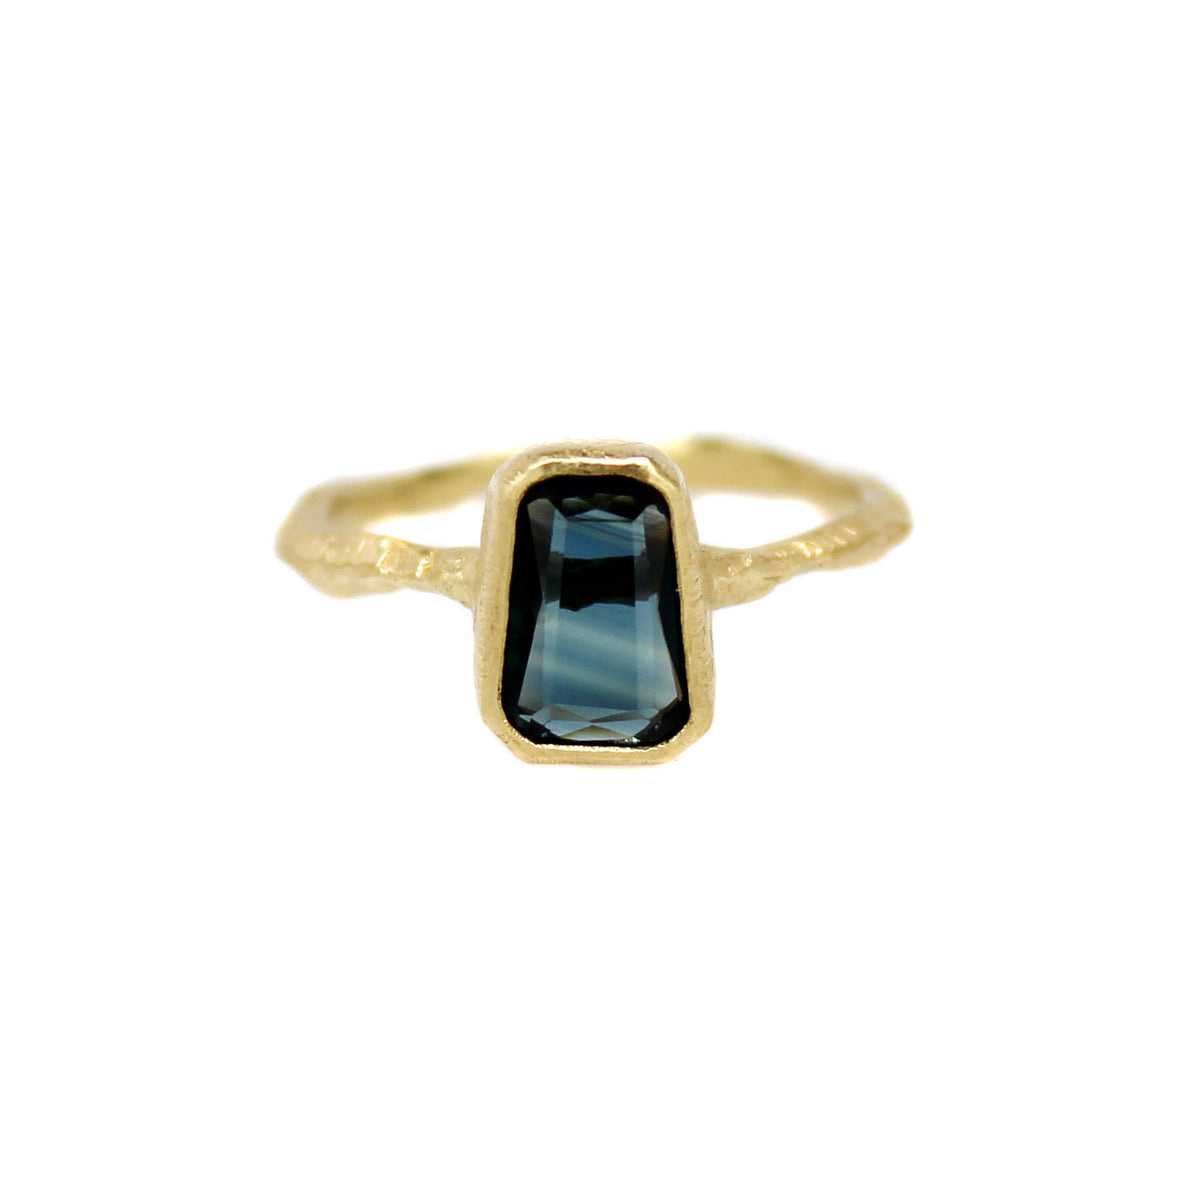 One-of-a-Kind Narrow Crest Sapphire Ring